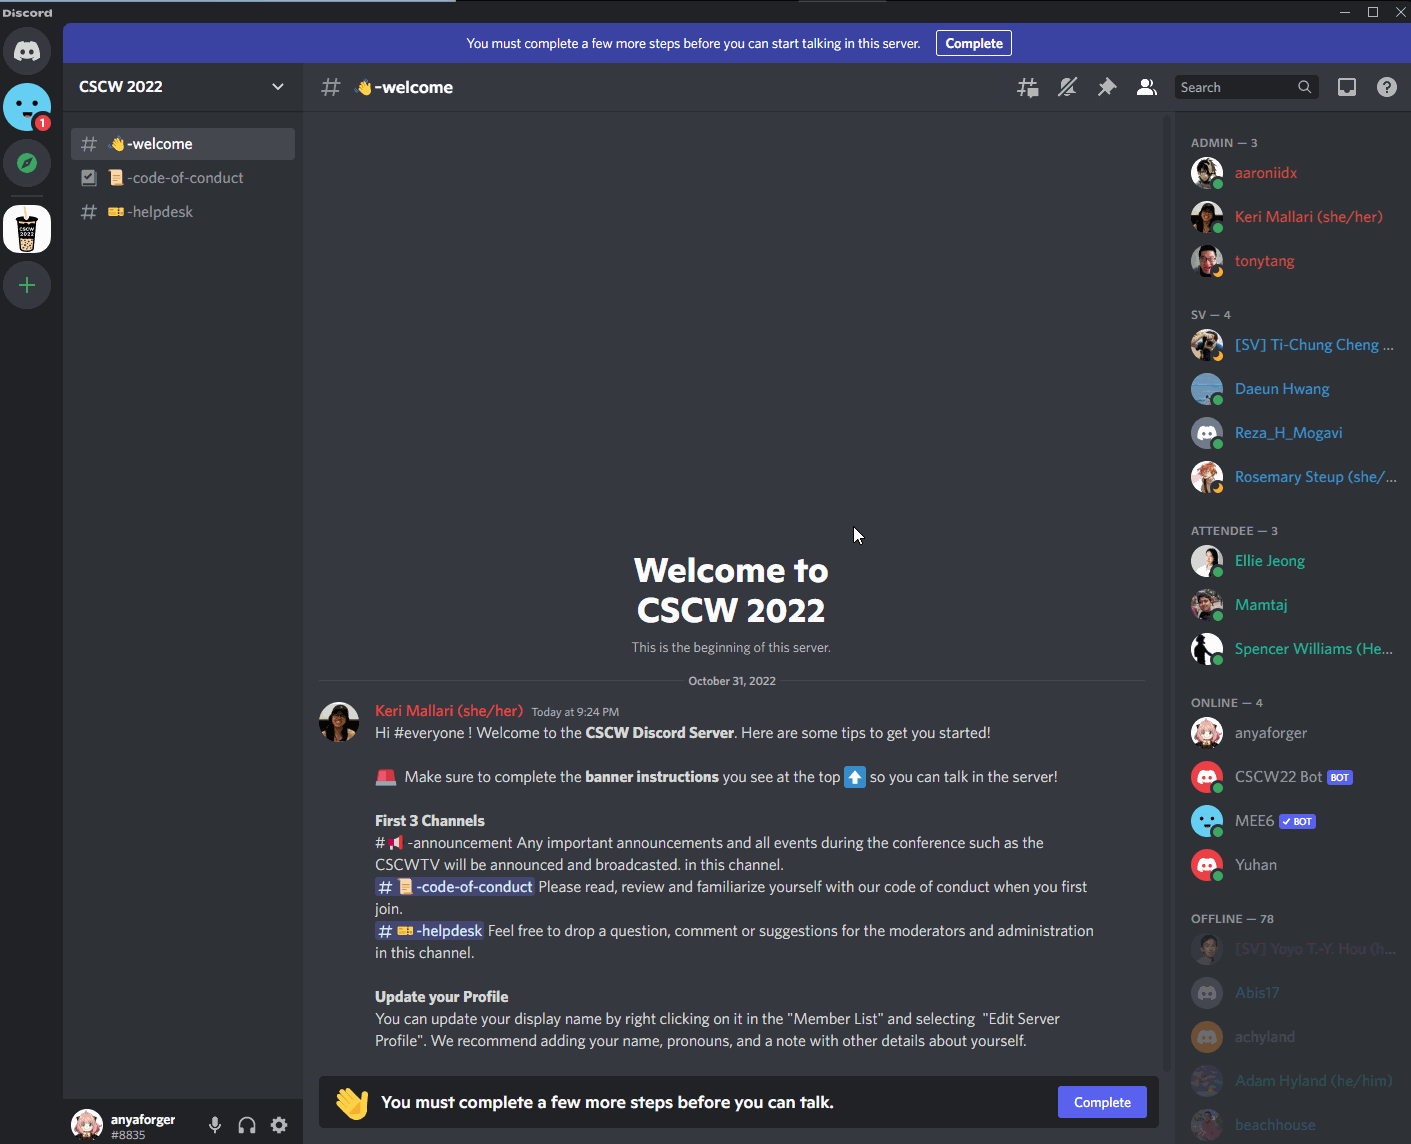 Discord Review